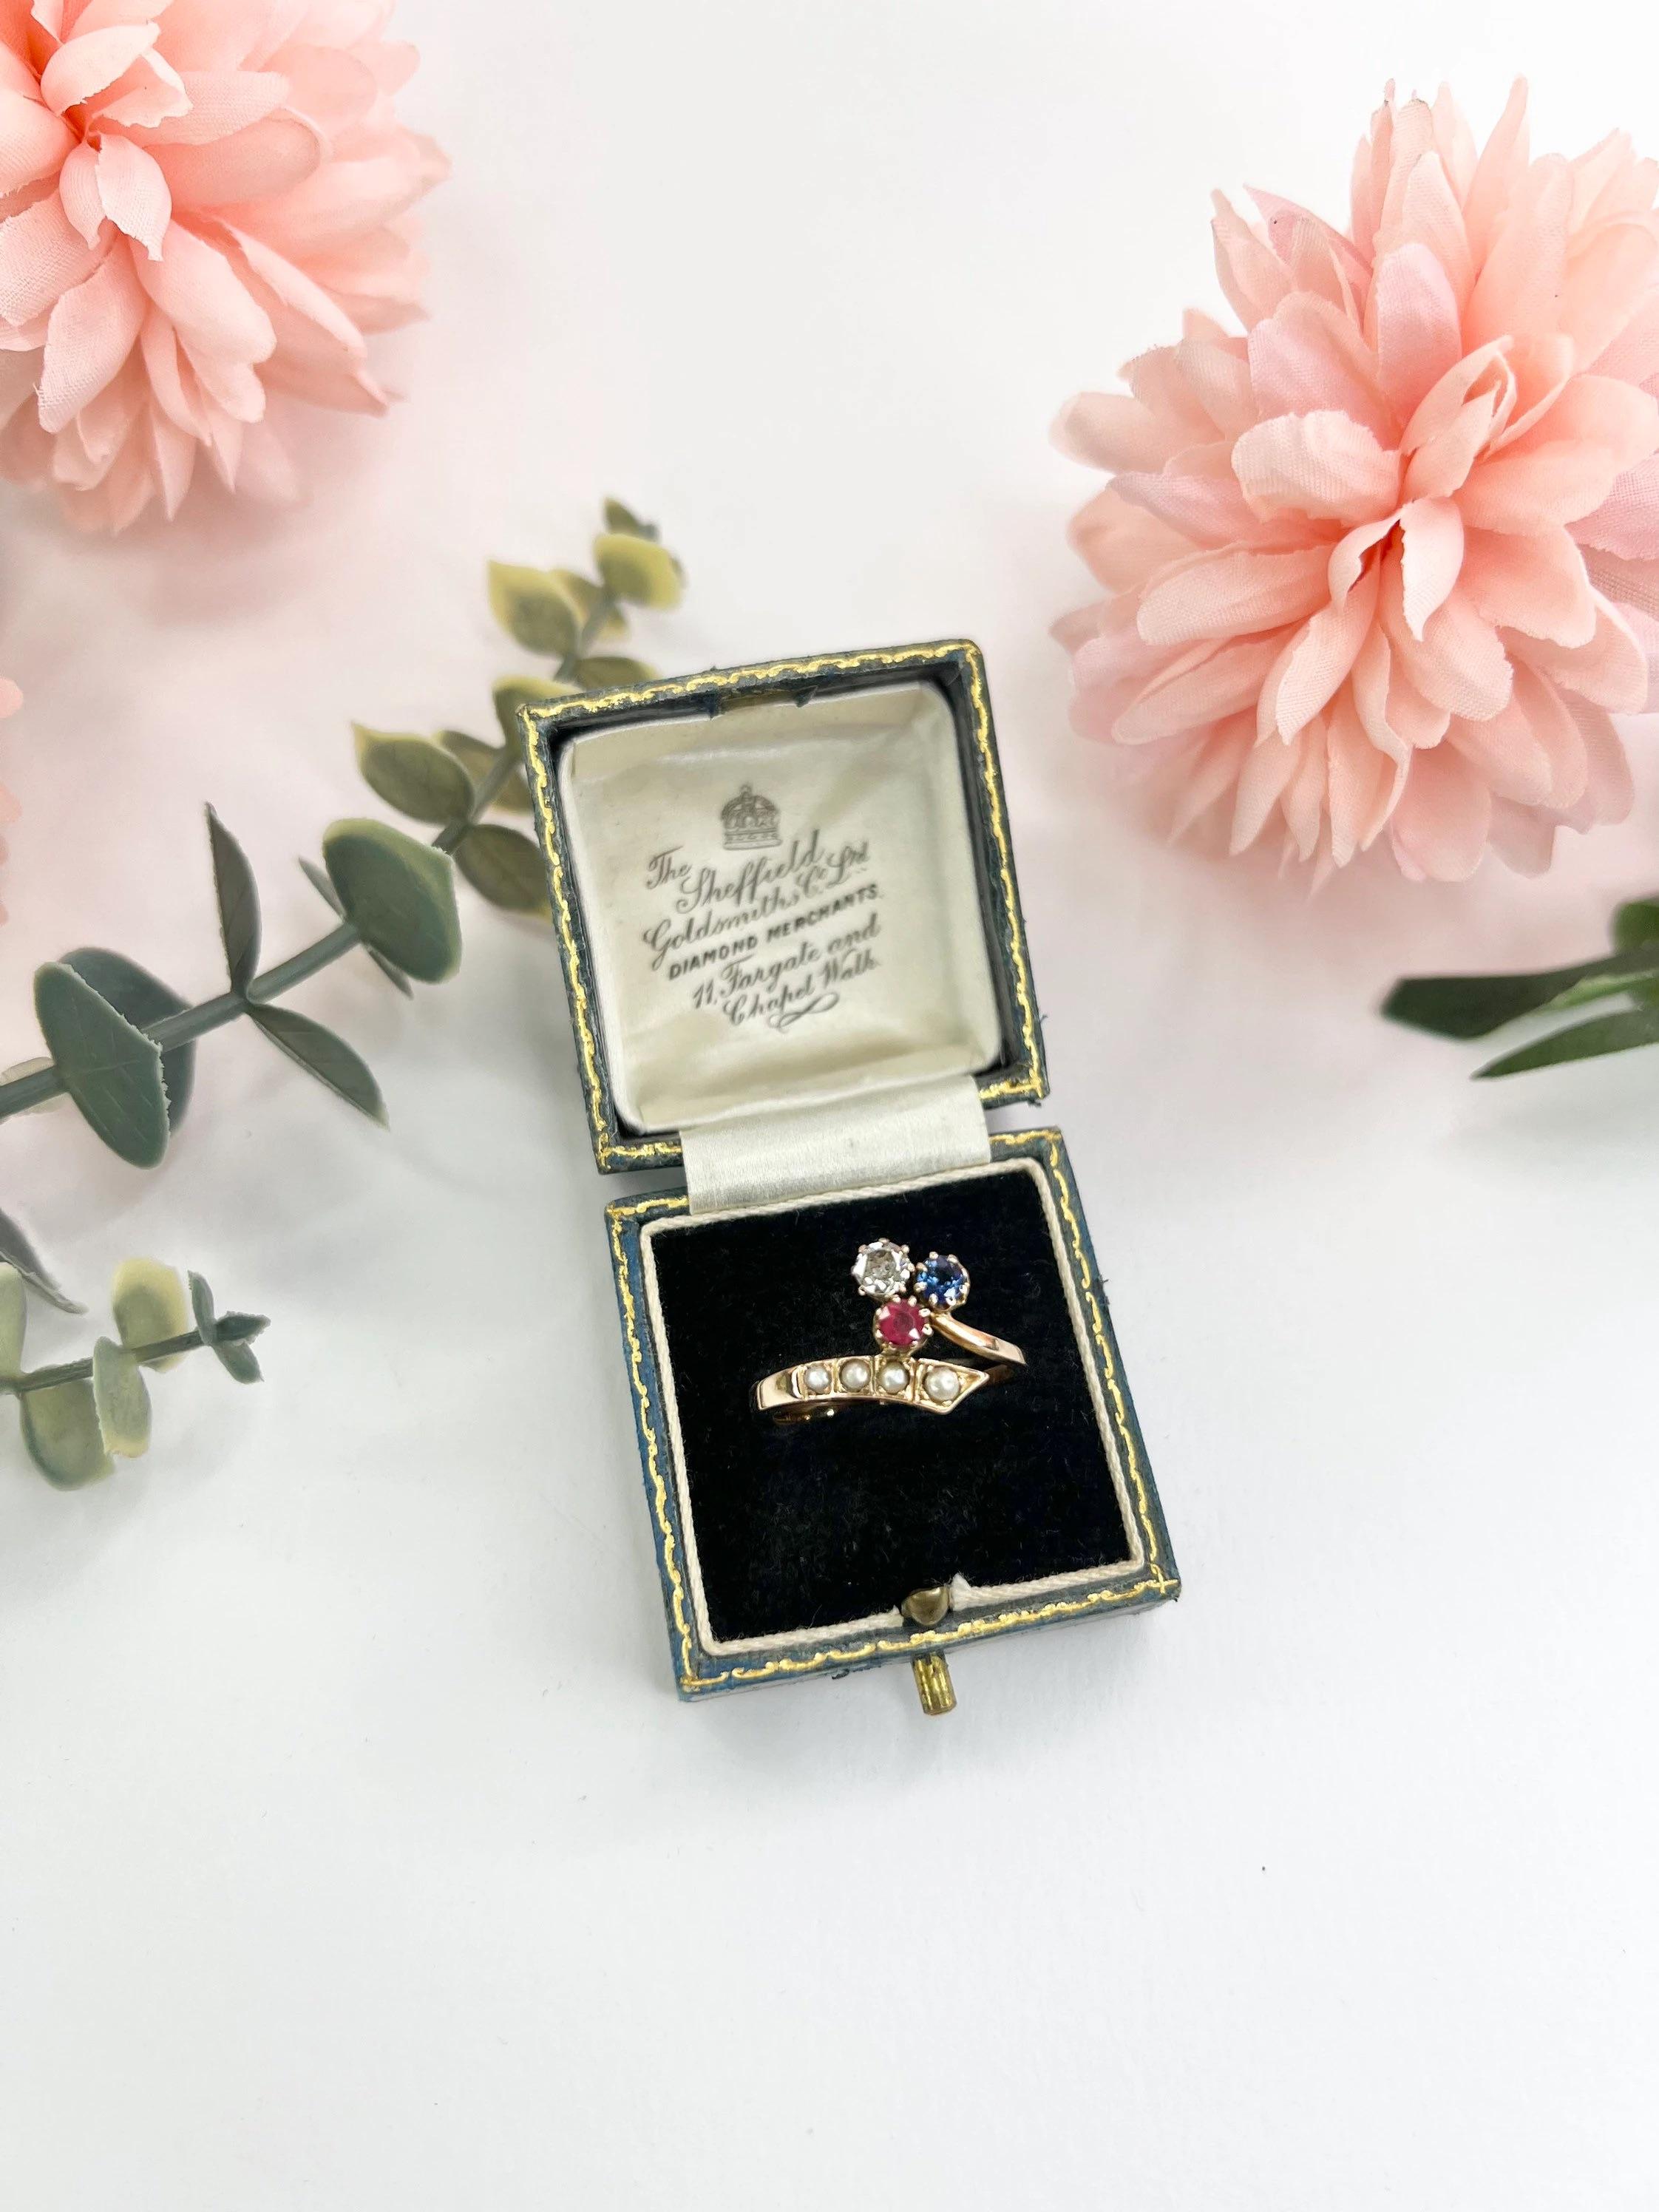 Antique Clover Ring 

18ct Rose Gold Tested 

Circa 1900

Beautiful, Edwardian ‘Red, White & Blue’ Clover Ring. Set with Ruby, Diamond & Sapphire & a Natural Seed Pearl Crossover. 

Height of The Ring Measures Approx 11.5mm

UK Size R

US Size 8